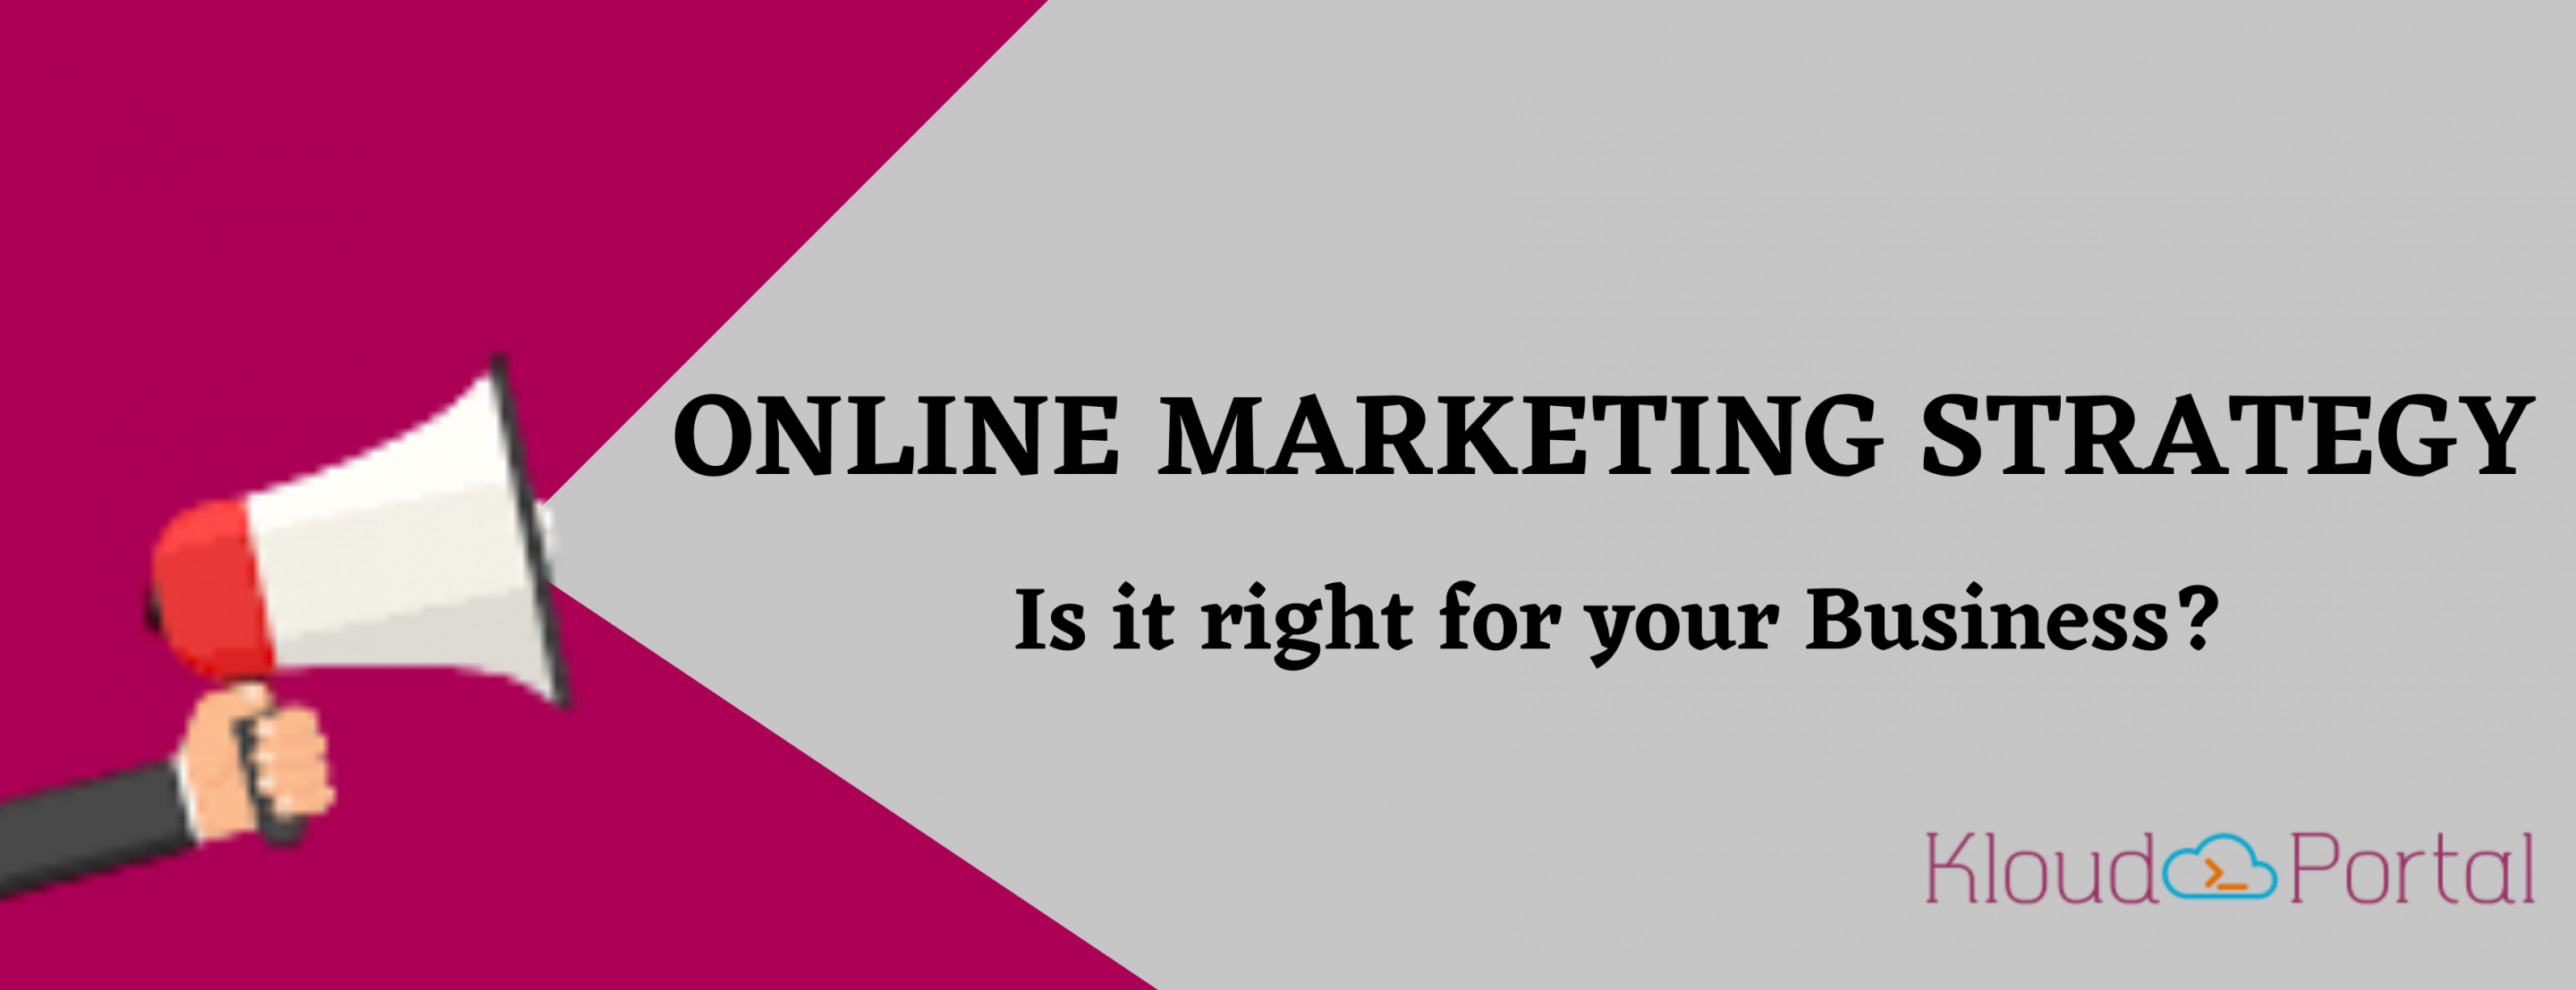 Online marketing Strategy Is it right for your Business?